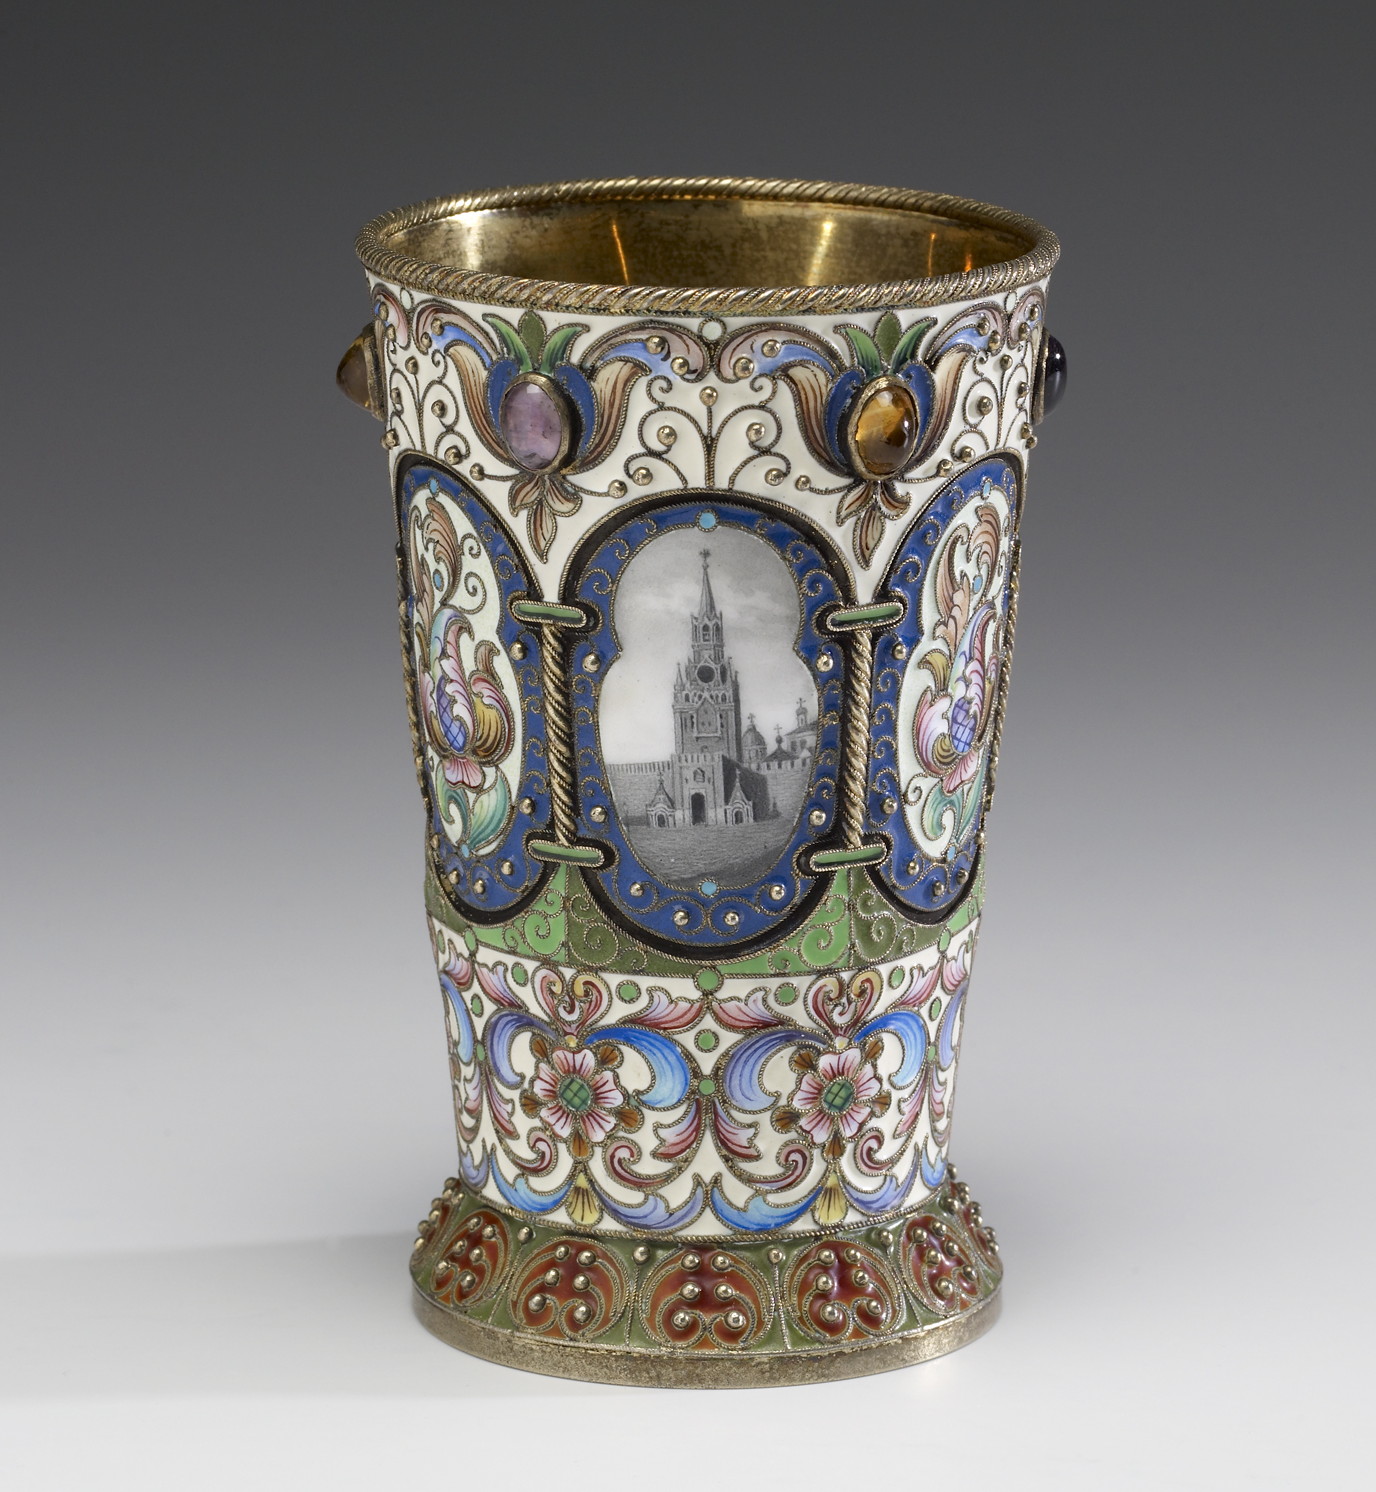 Russian silver enamel beaker / cup by Fedor Ruckert with views of Kremlin, Moscow